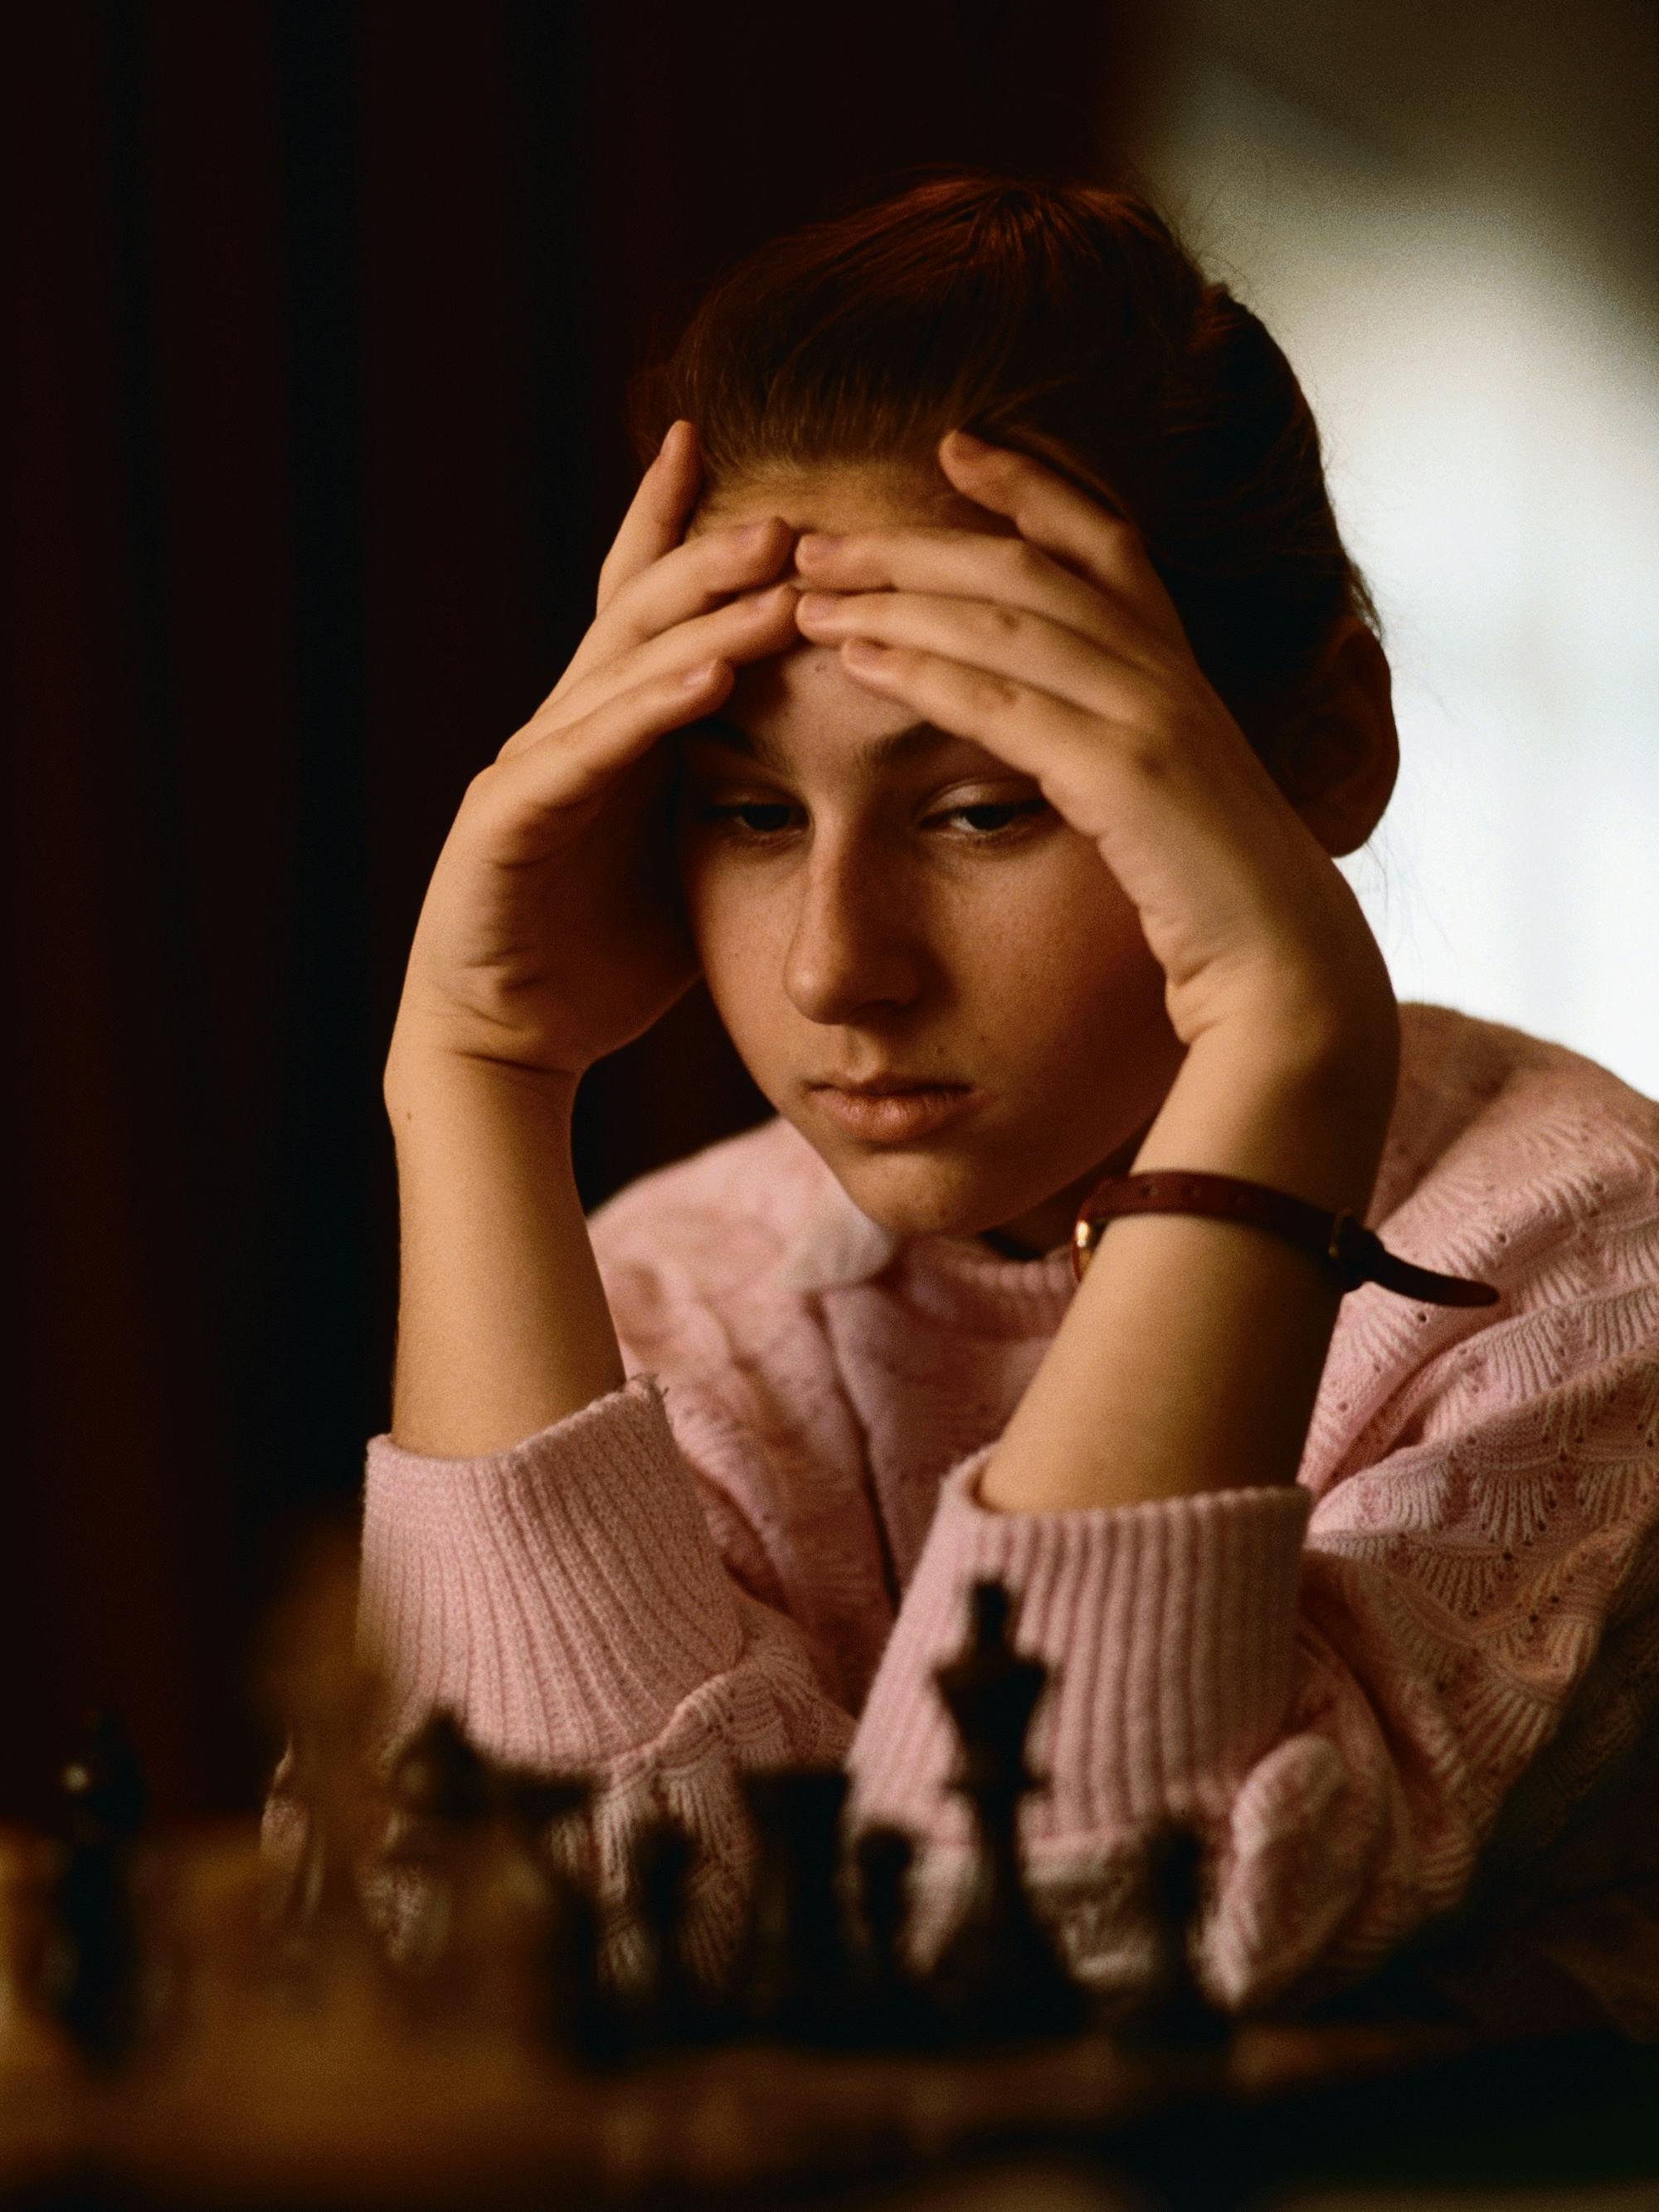 Polgár at age 12. Looking almost like a ballerina in a pink sweater, her hair pulled back, she stares pensively at a chess board.